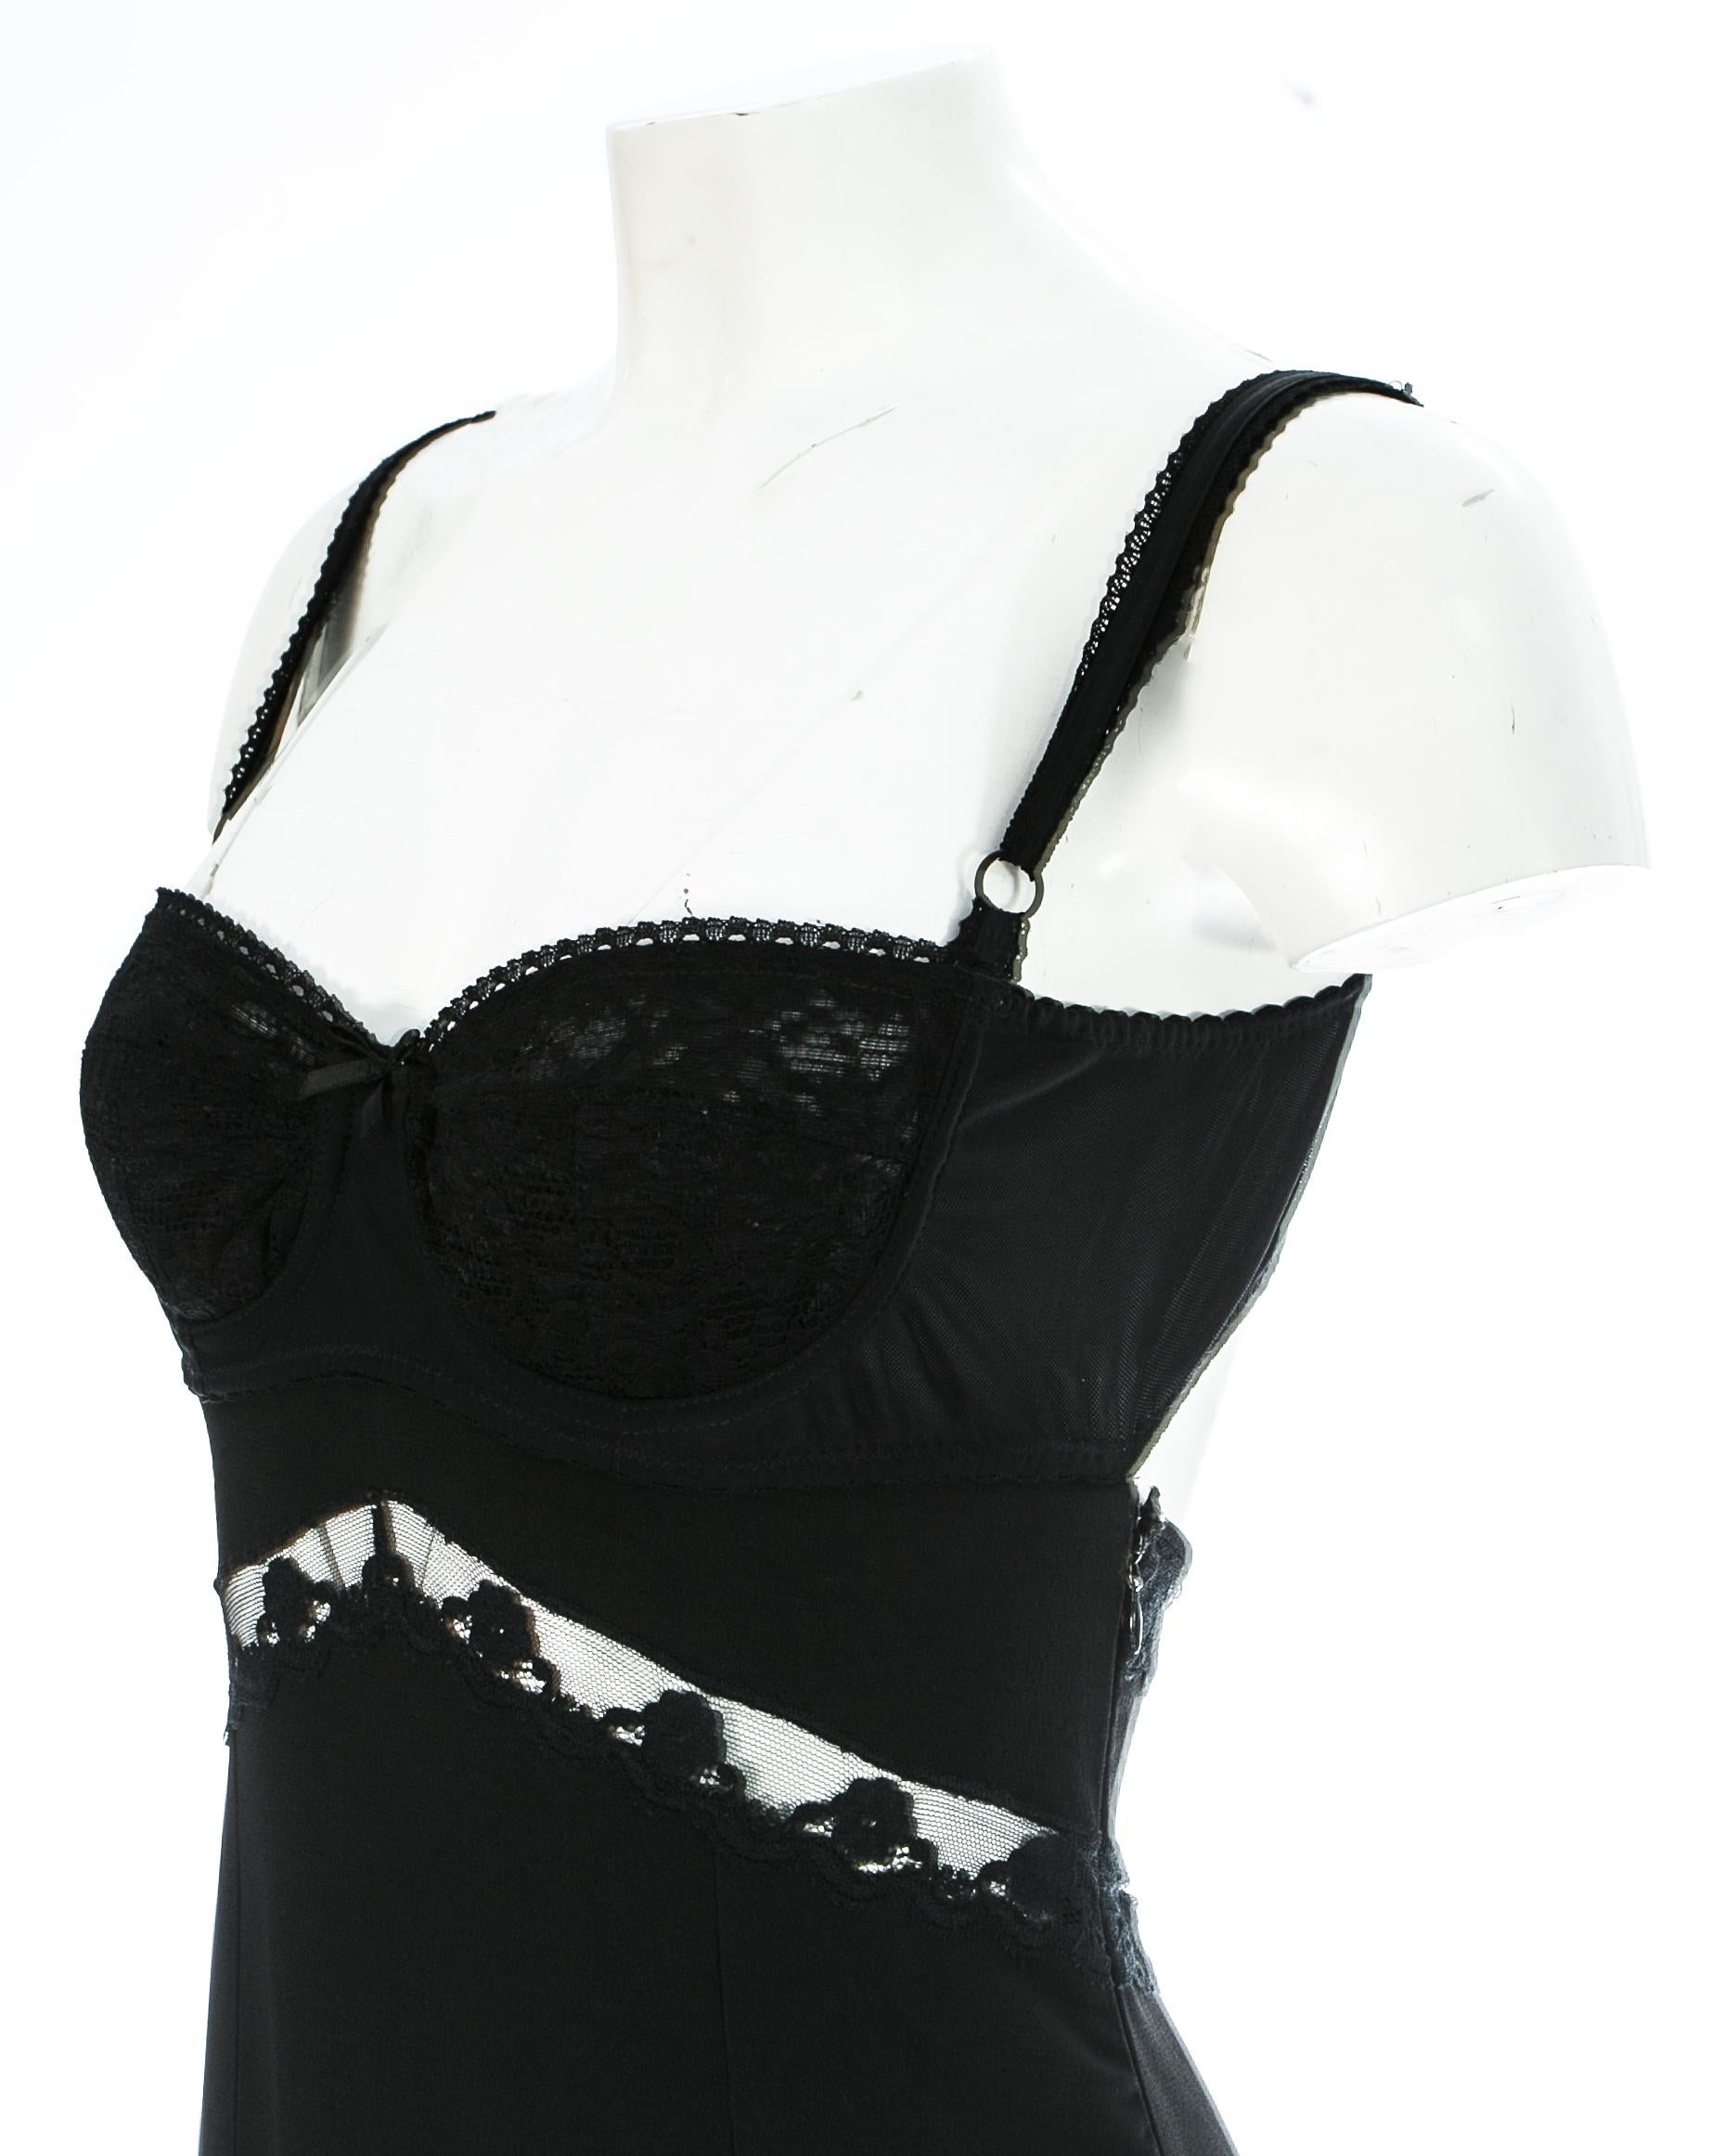 Black Dolce & Gabbana black crepe evening dress with lace cut outs and bra, A/W 1997 For Sale